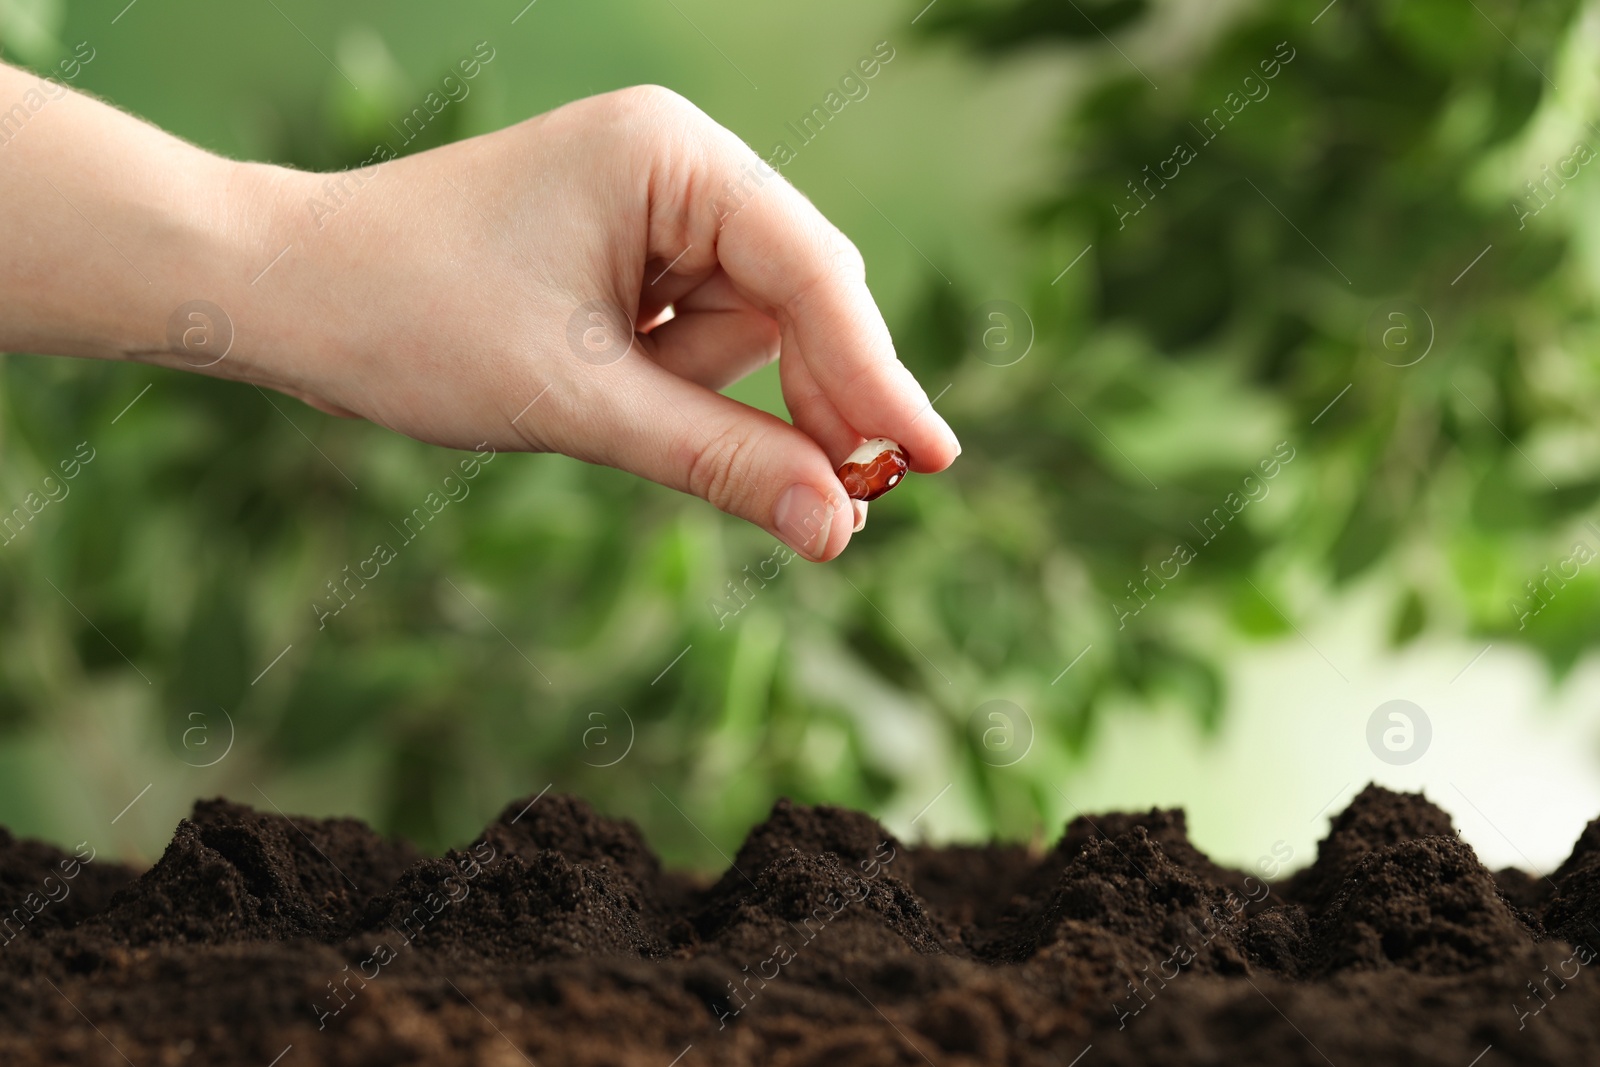 Photo of Woman putting bean into fertile soil against blurred background, closeup. Vegetable seed planting